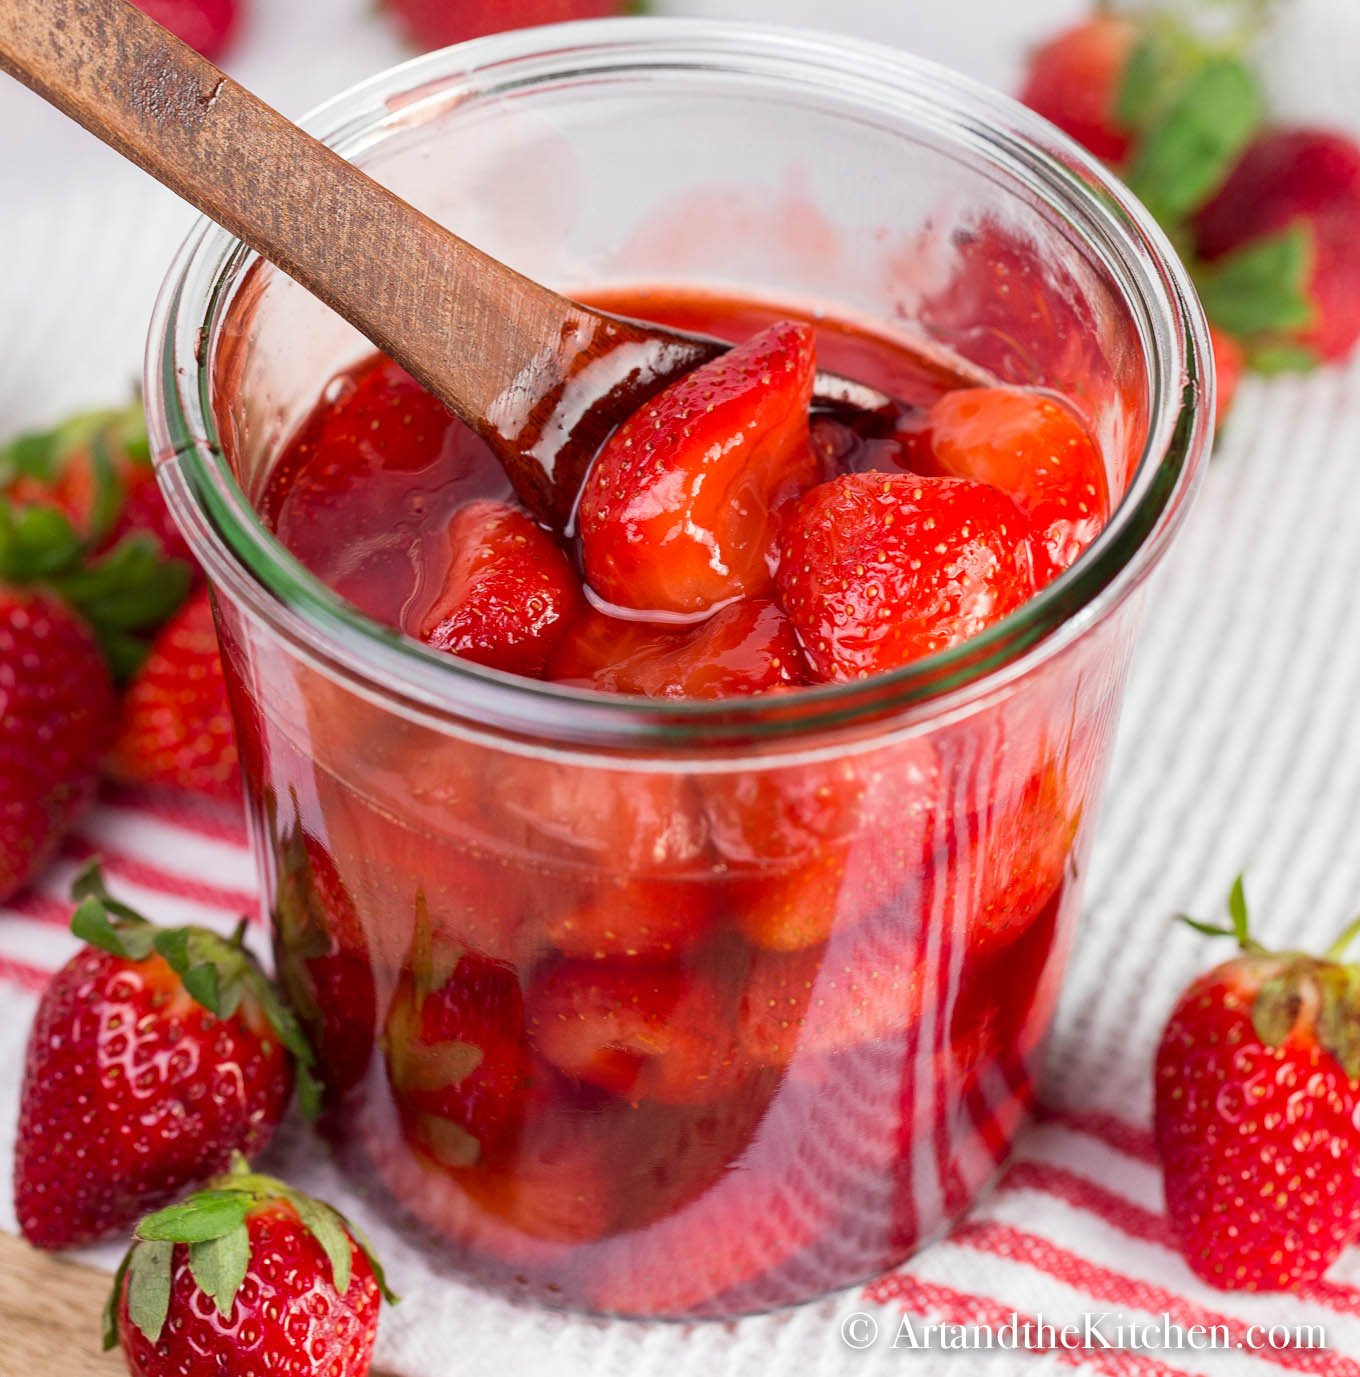 Glass jar filled with homemade strawberry sauce. Wooden spoon scooping sauce out of jar.